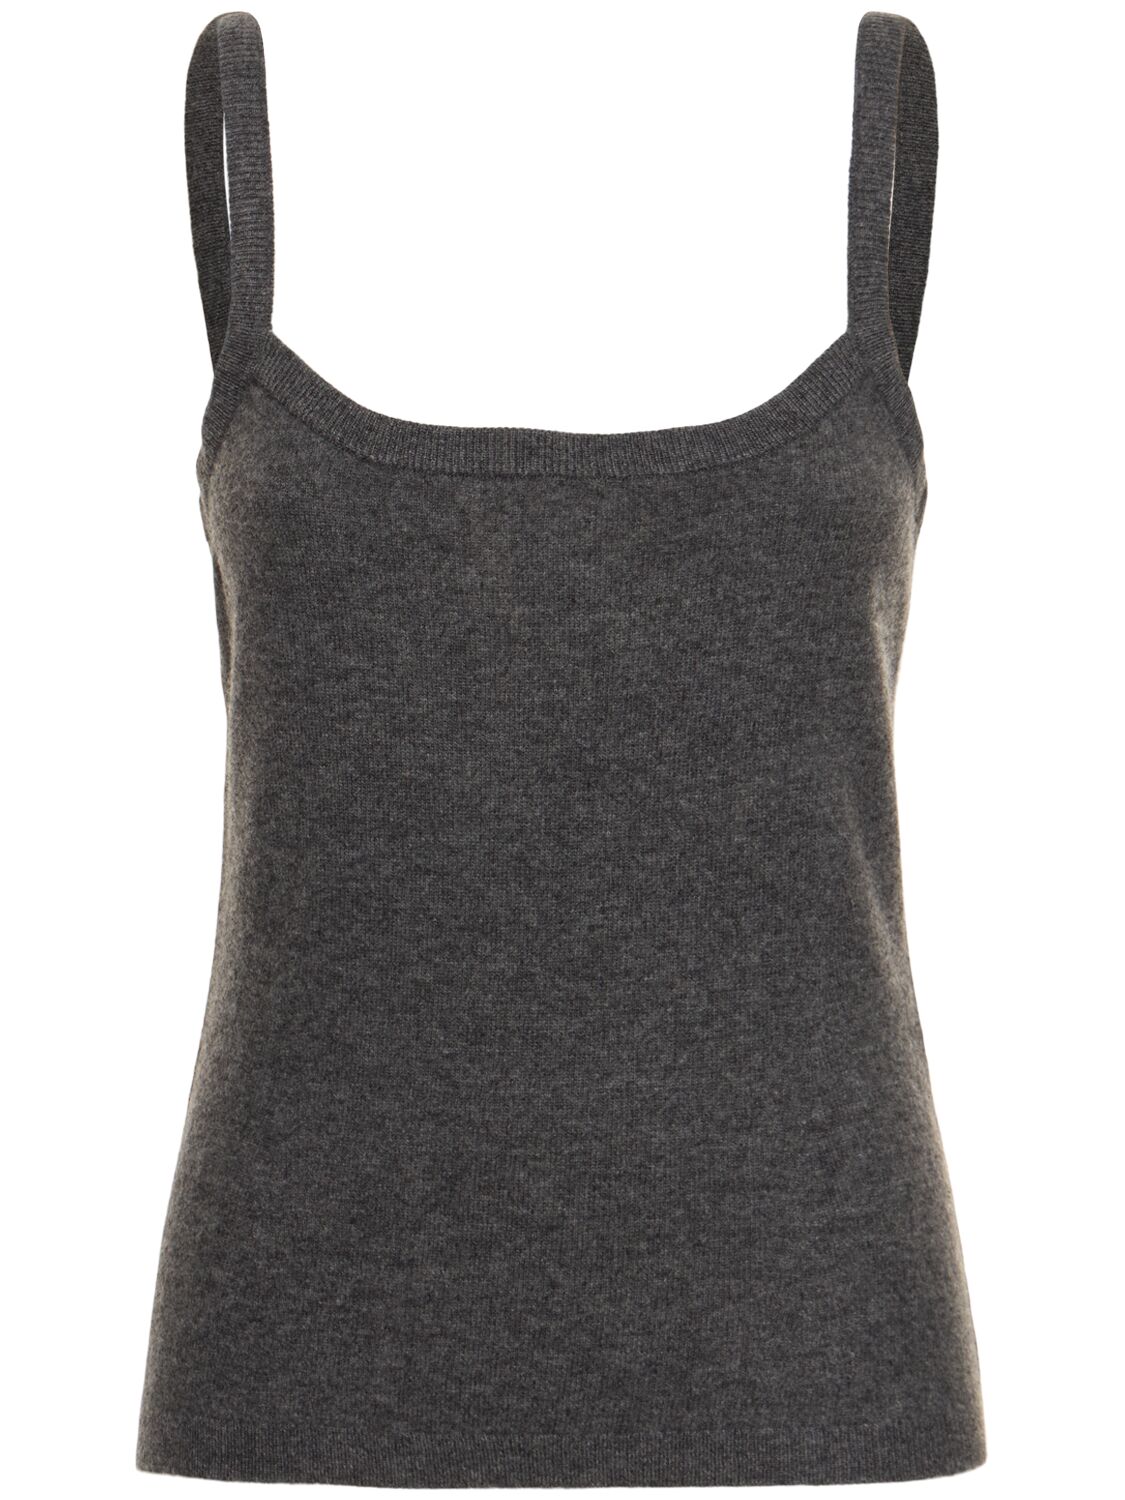 Image of Como Wool Blend Camisole Top